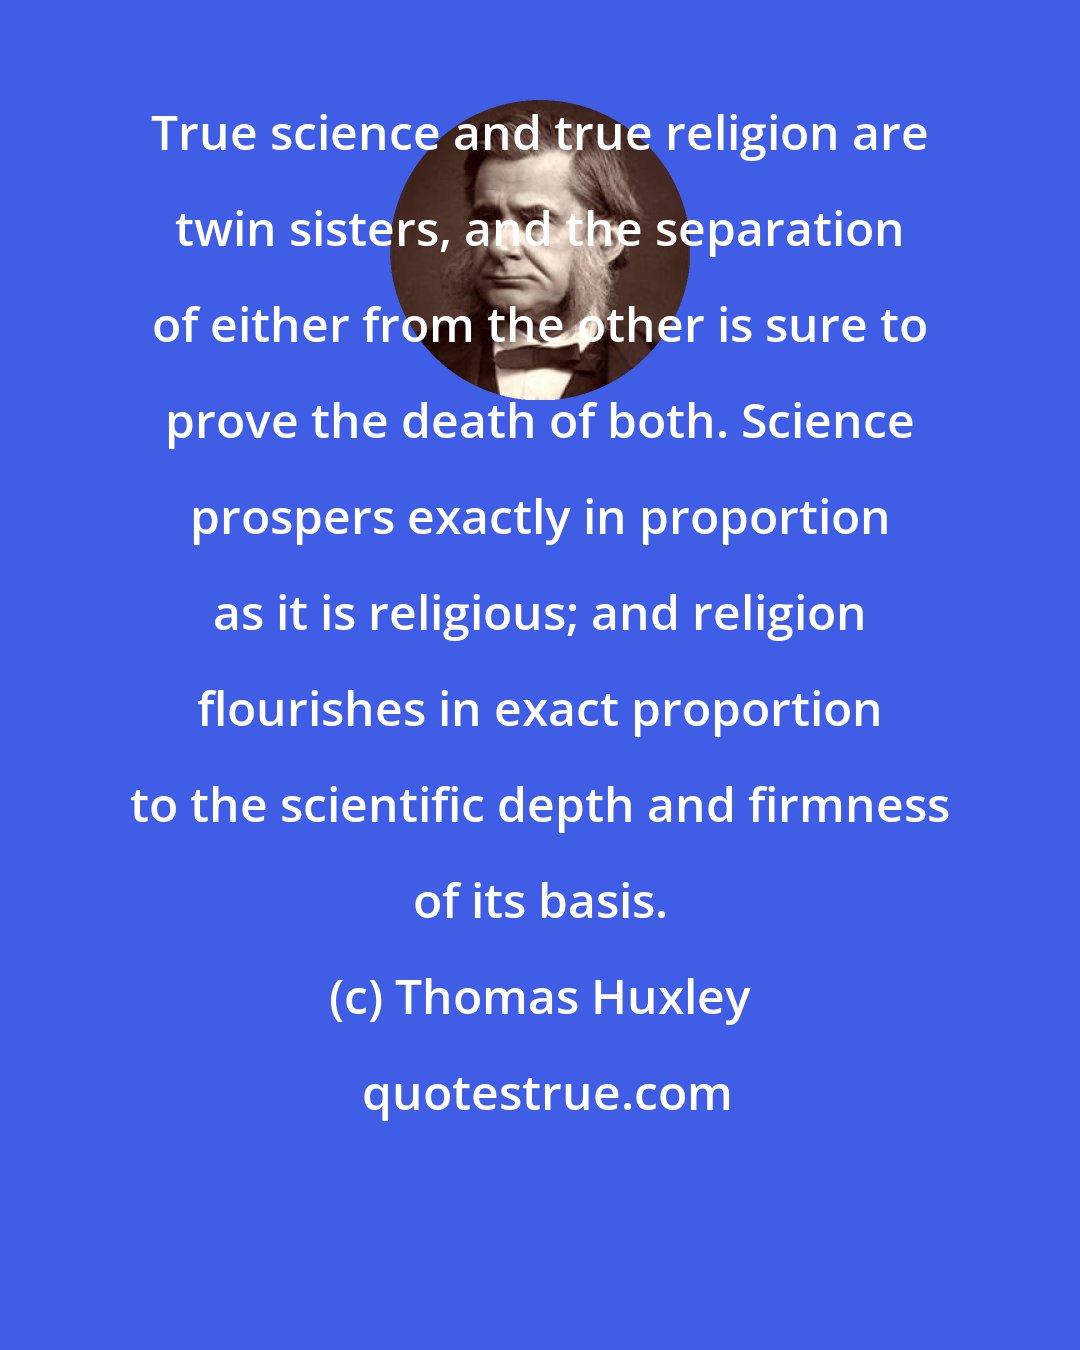 Thomas Huxley: True science and true religion are twin sisters, and the separation of either from the other is sure to prove the death of both. Science prospers exactly in proportion as it is religious; and religion flourishes in exact proportion to the scientific depth and firmness of its basis.